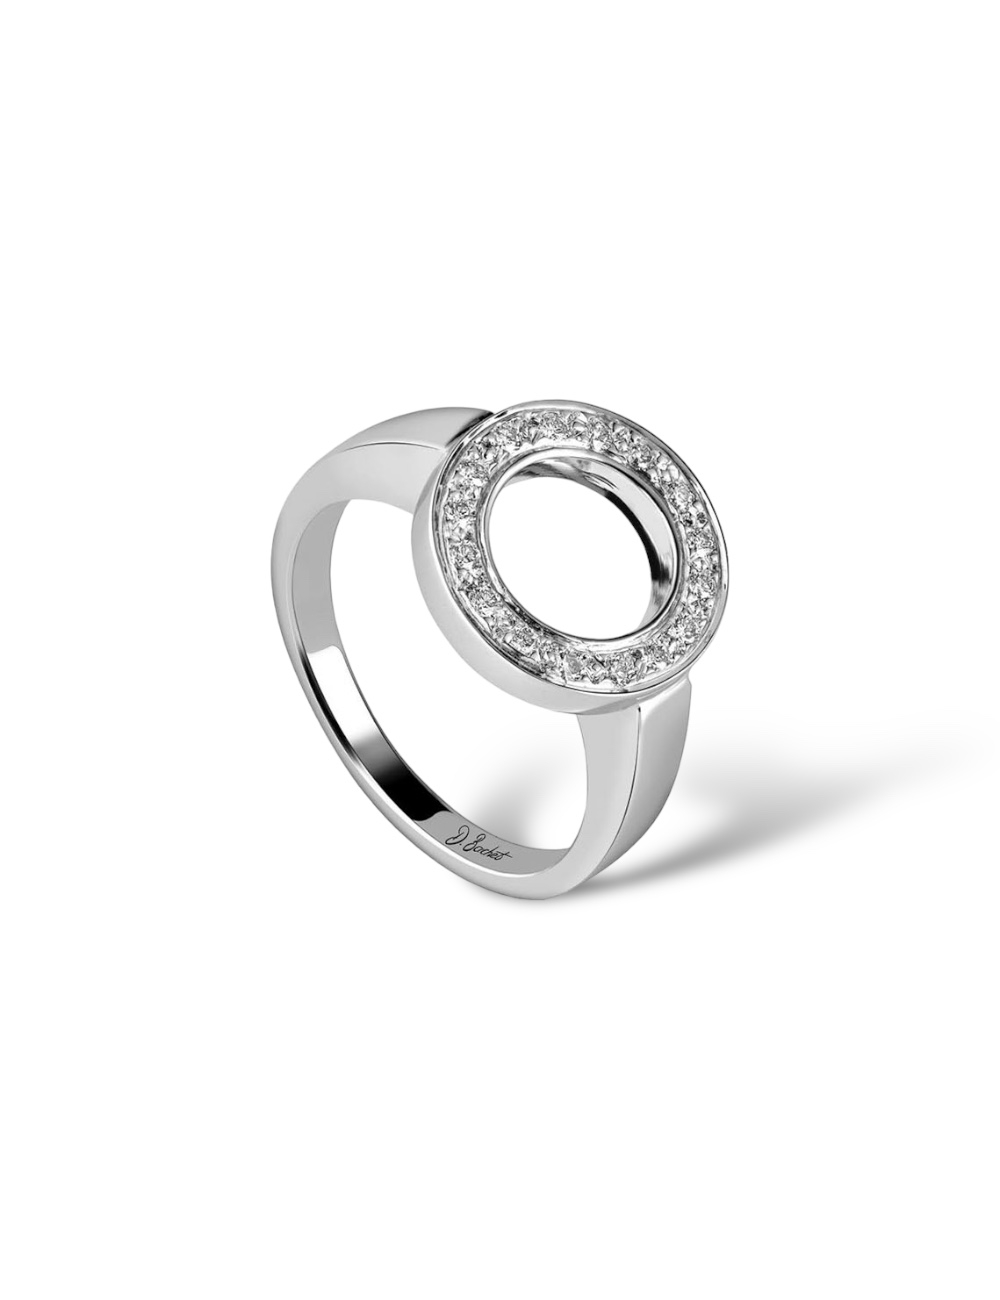 D.Bachet's Circle diamond ring, a symbol of harmony in gold and platinum, everyday chic.